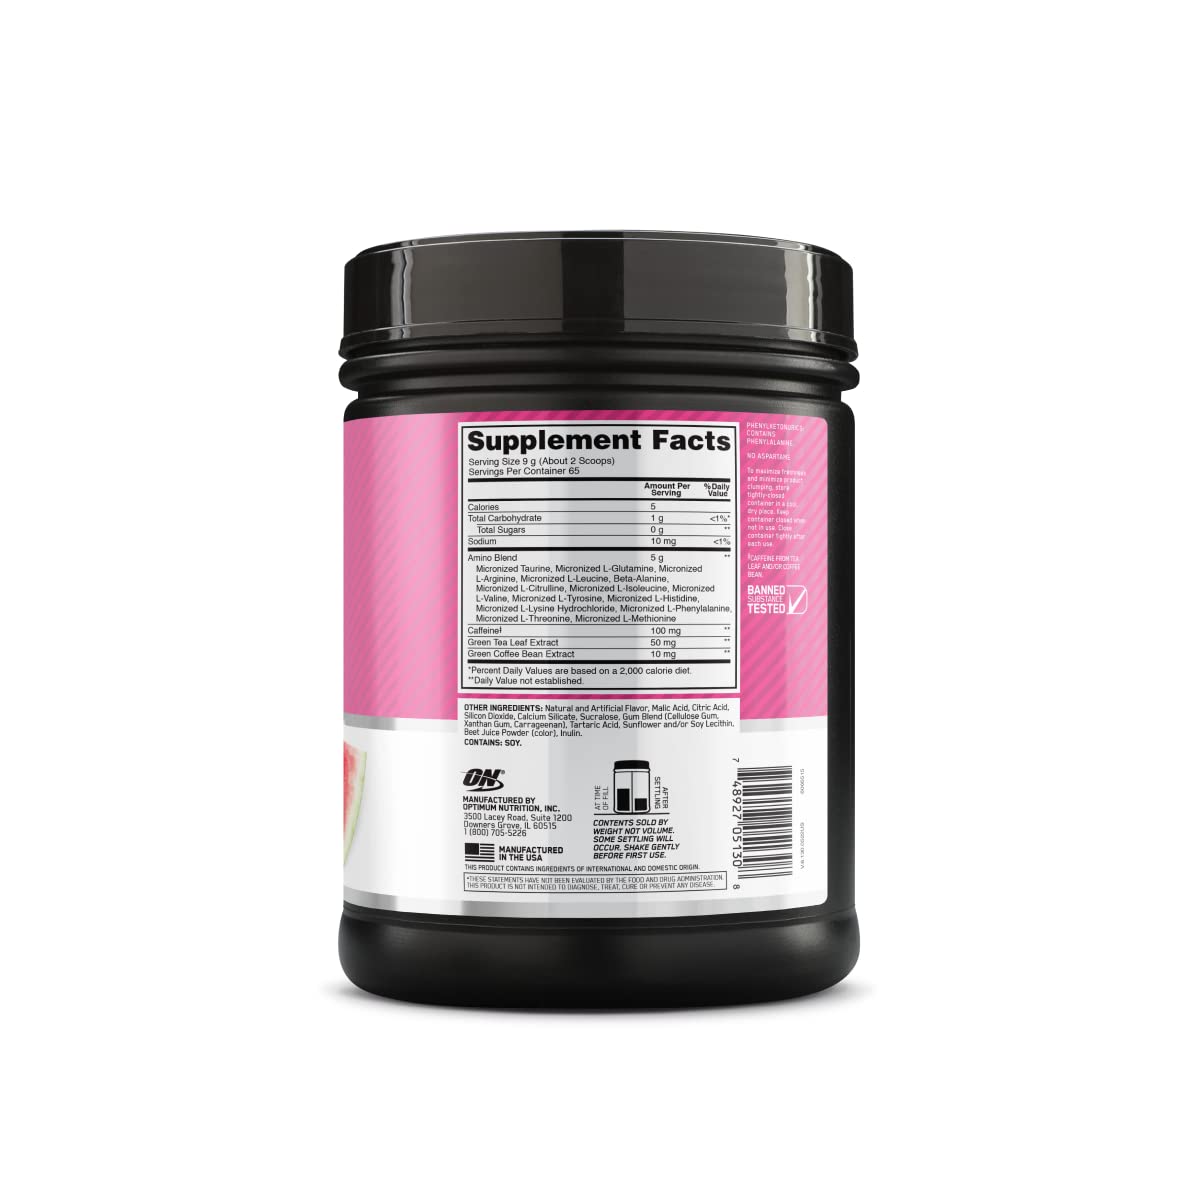 Optimum Nutrition Amino Energy - Pre Workout with Green Tea, BCAA, Amino Acids, Keto Friendly, Green Coffee Extract, Energy Powder - Watermelon, 65 Servings (Packaging May Vary)